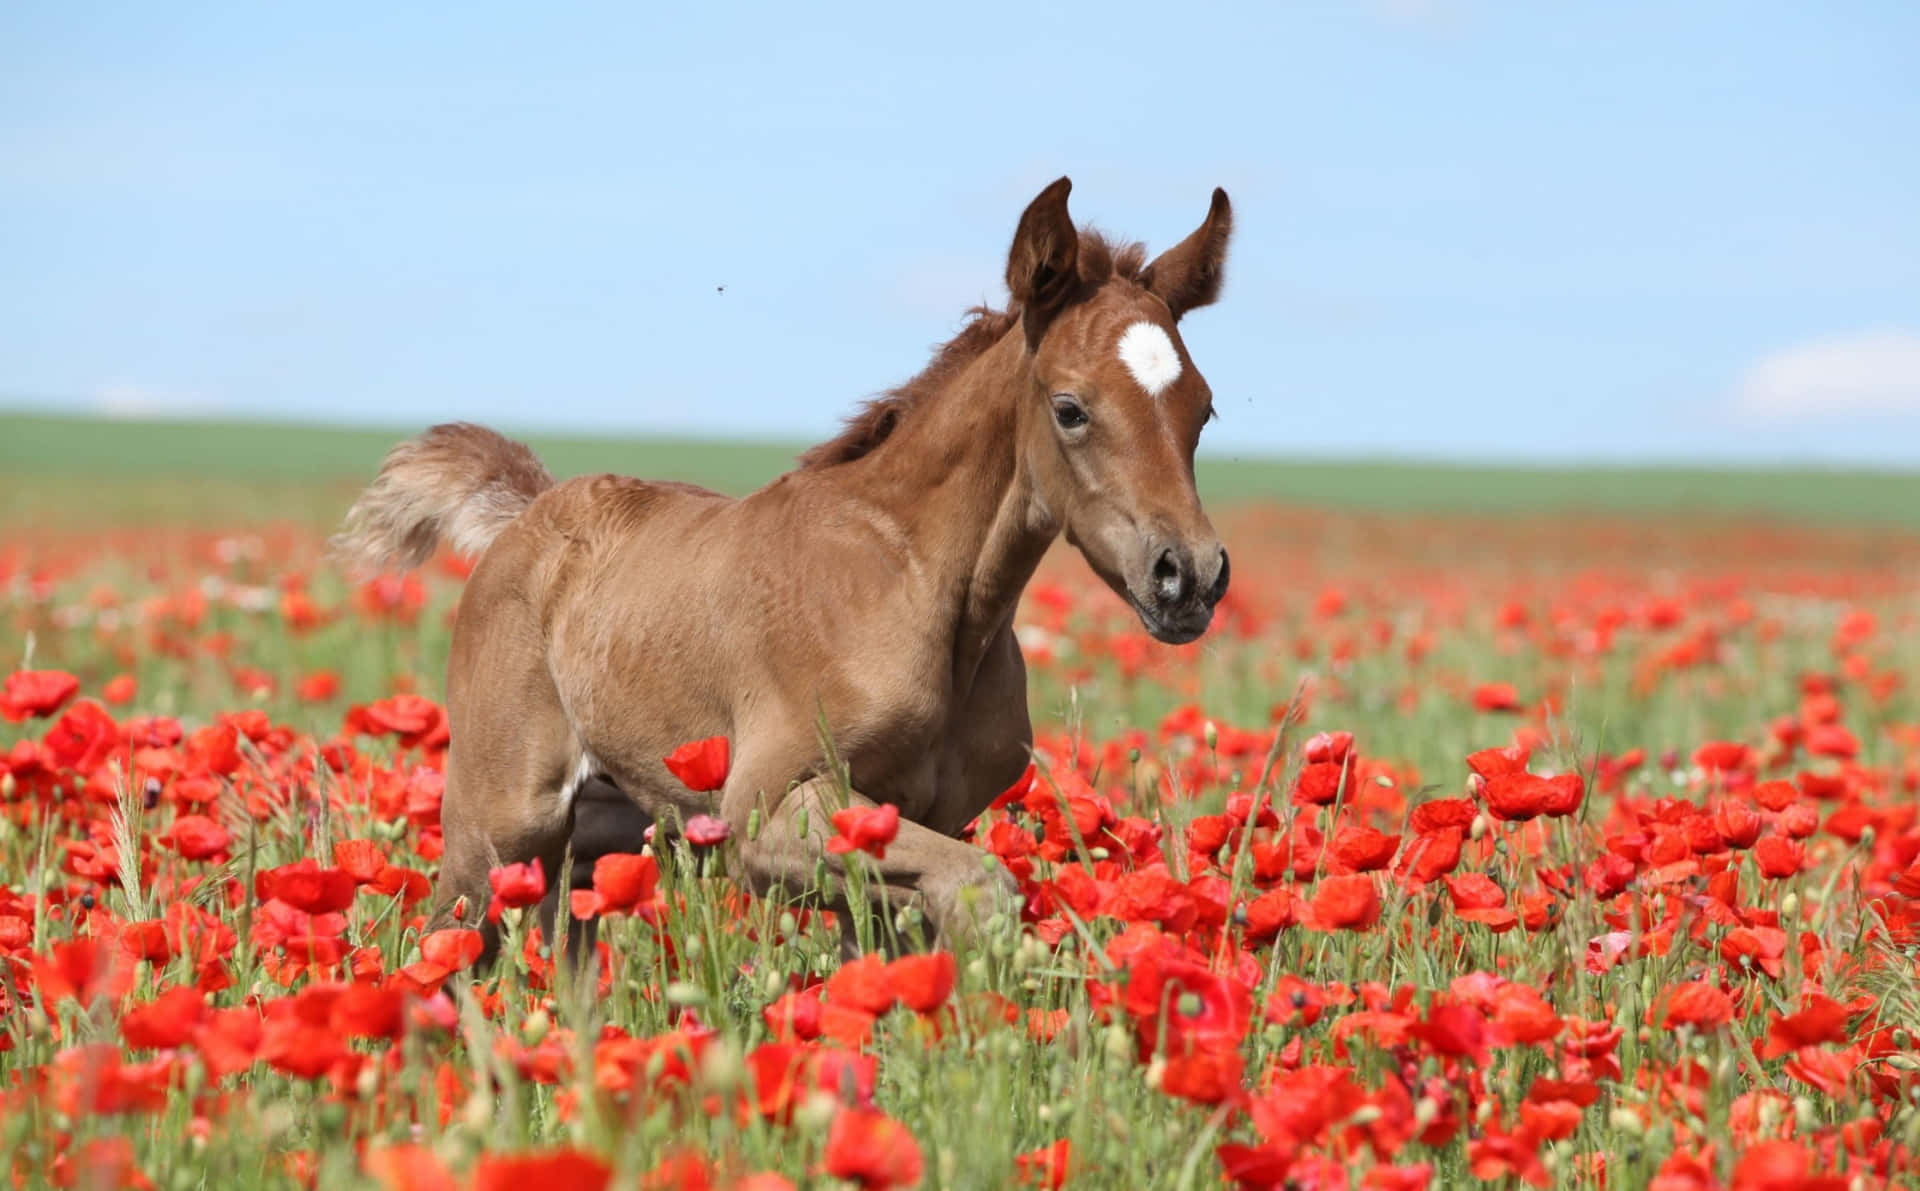 A Brown Horse Running Through A Field Of Red Poppies